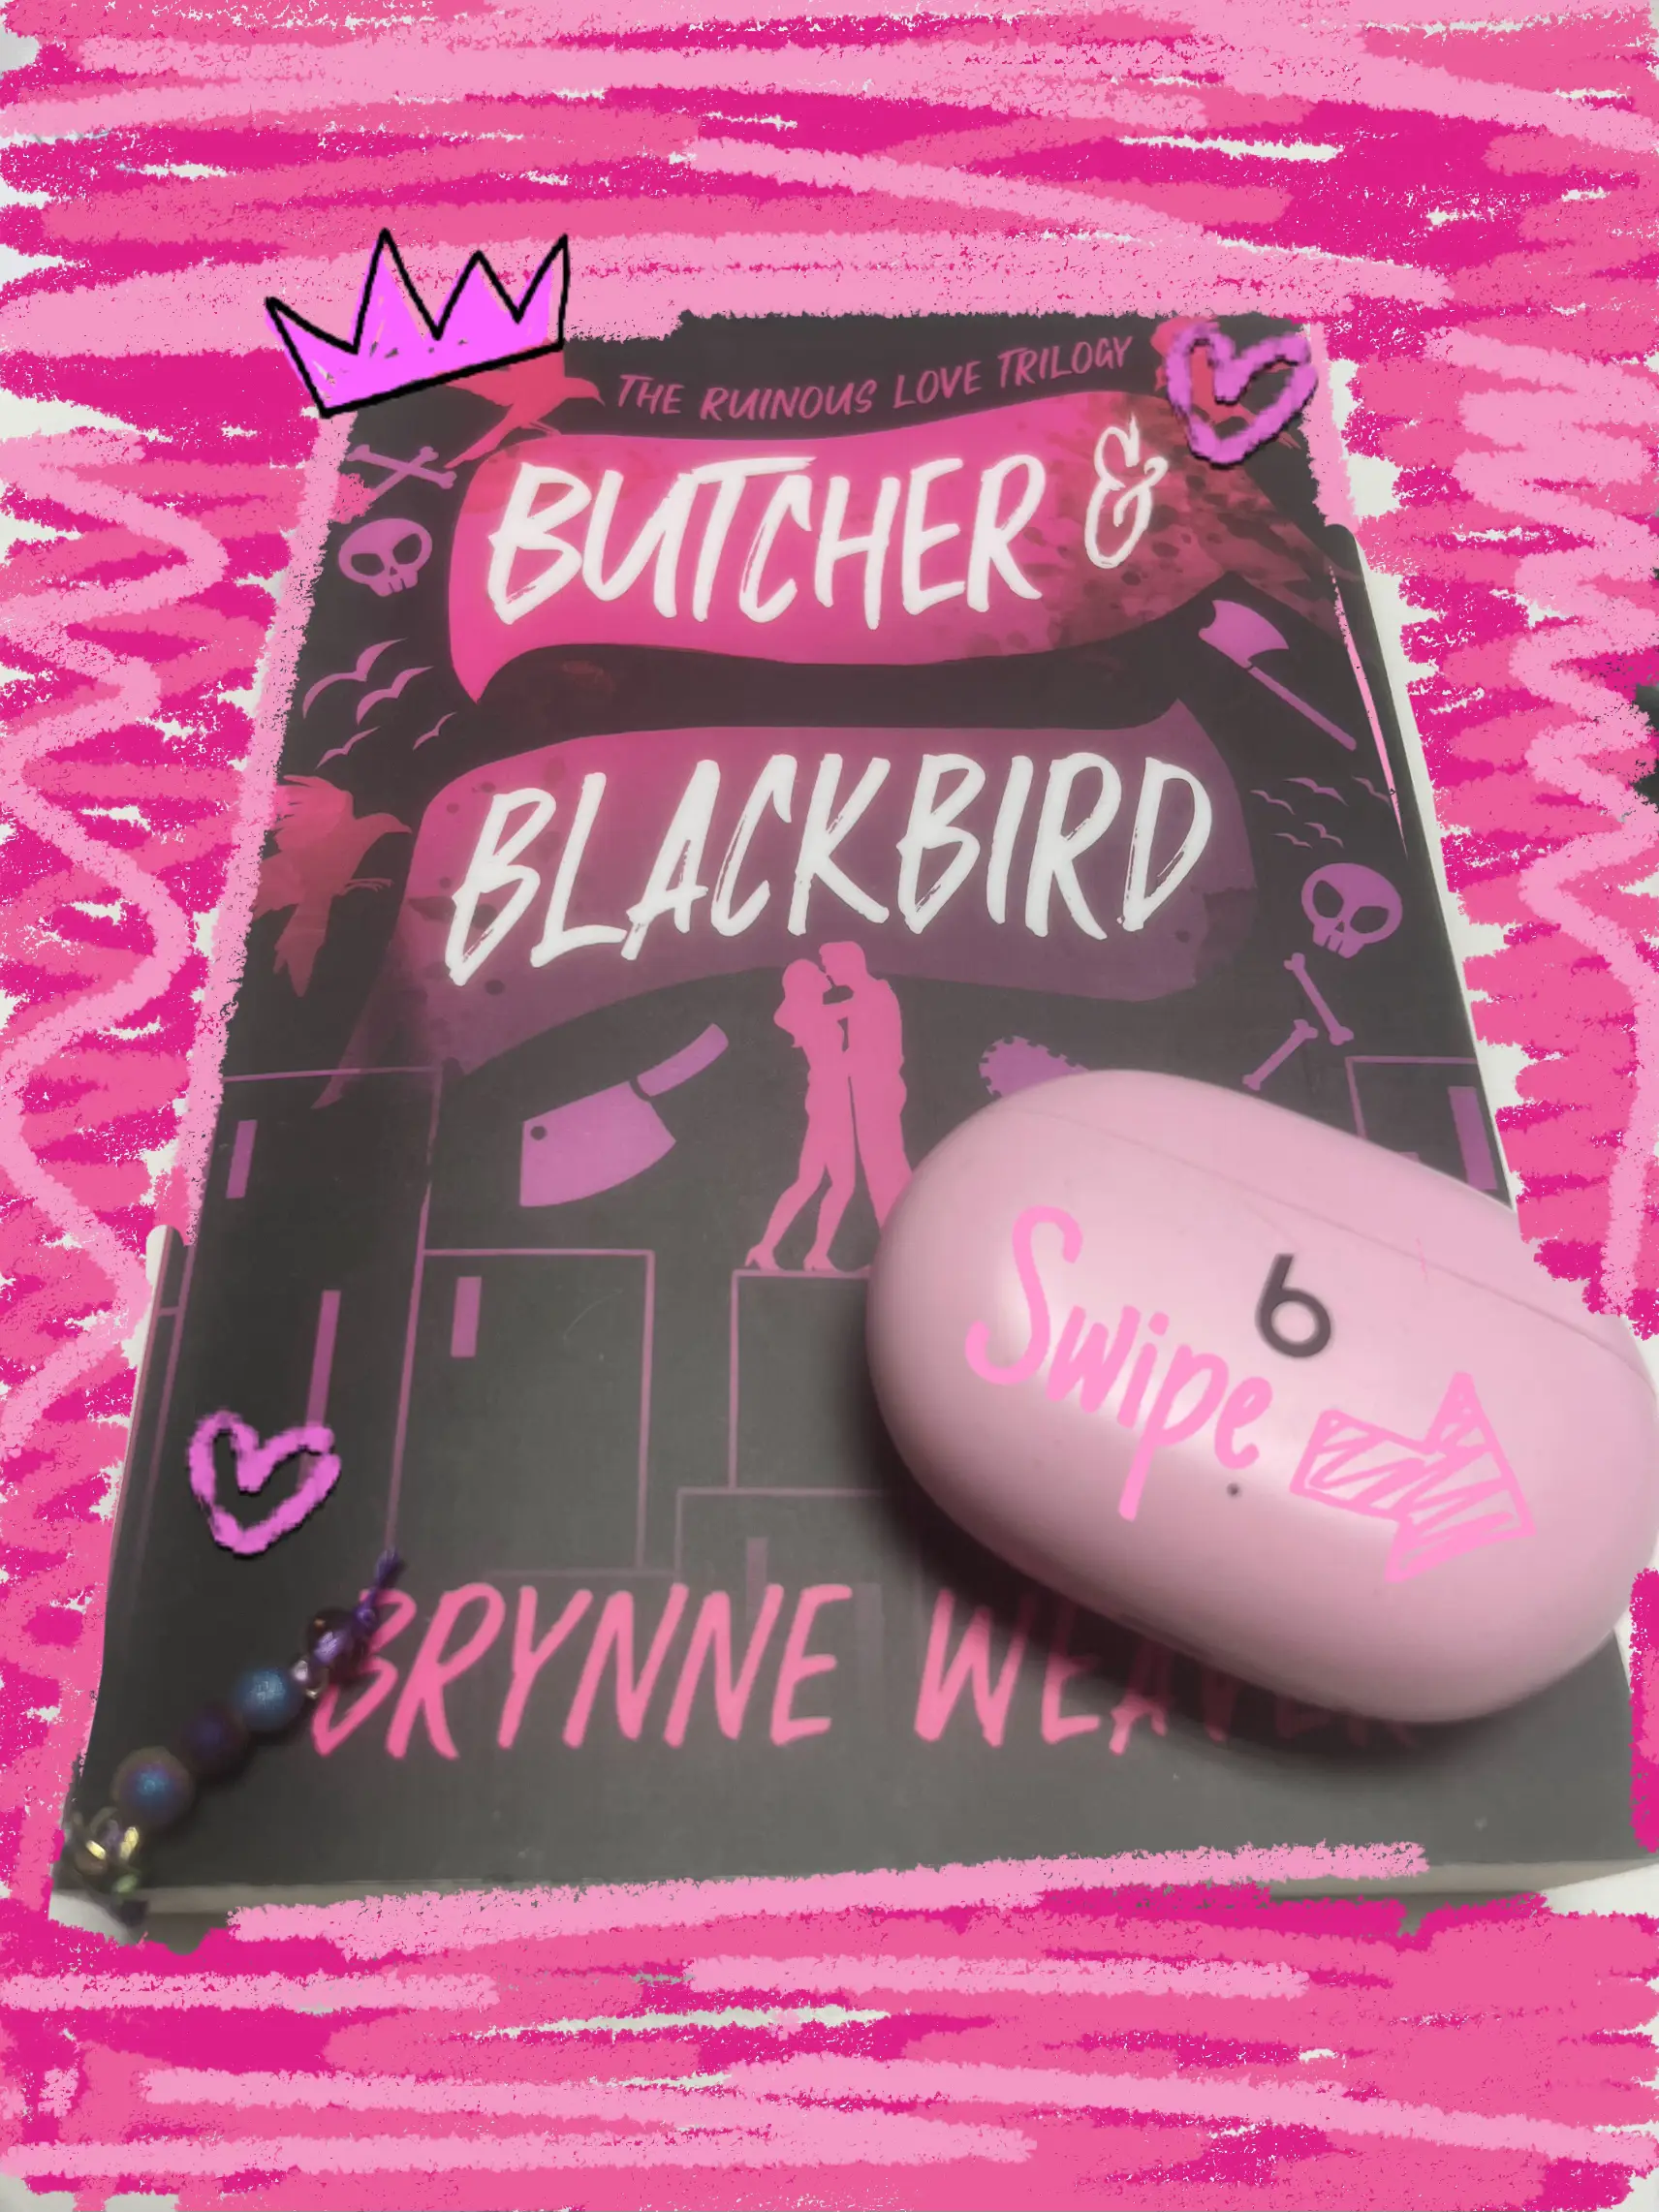 🩷💜Butcher and Blackbird🩷💜, Gallery posted by Julia Lathem🌼